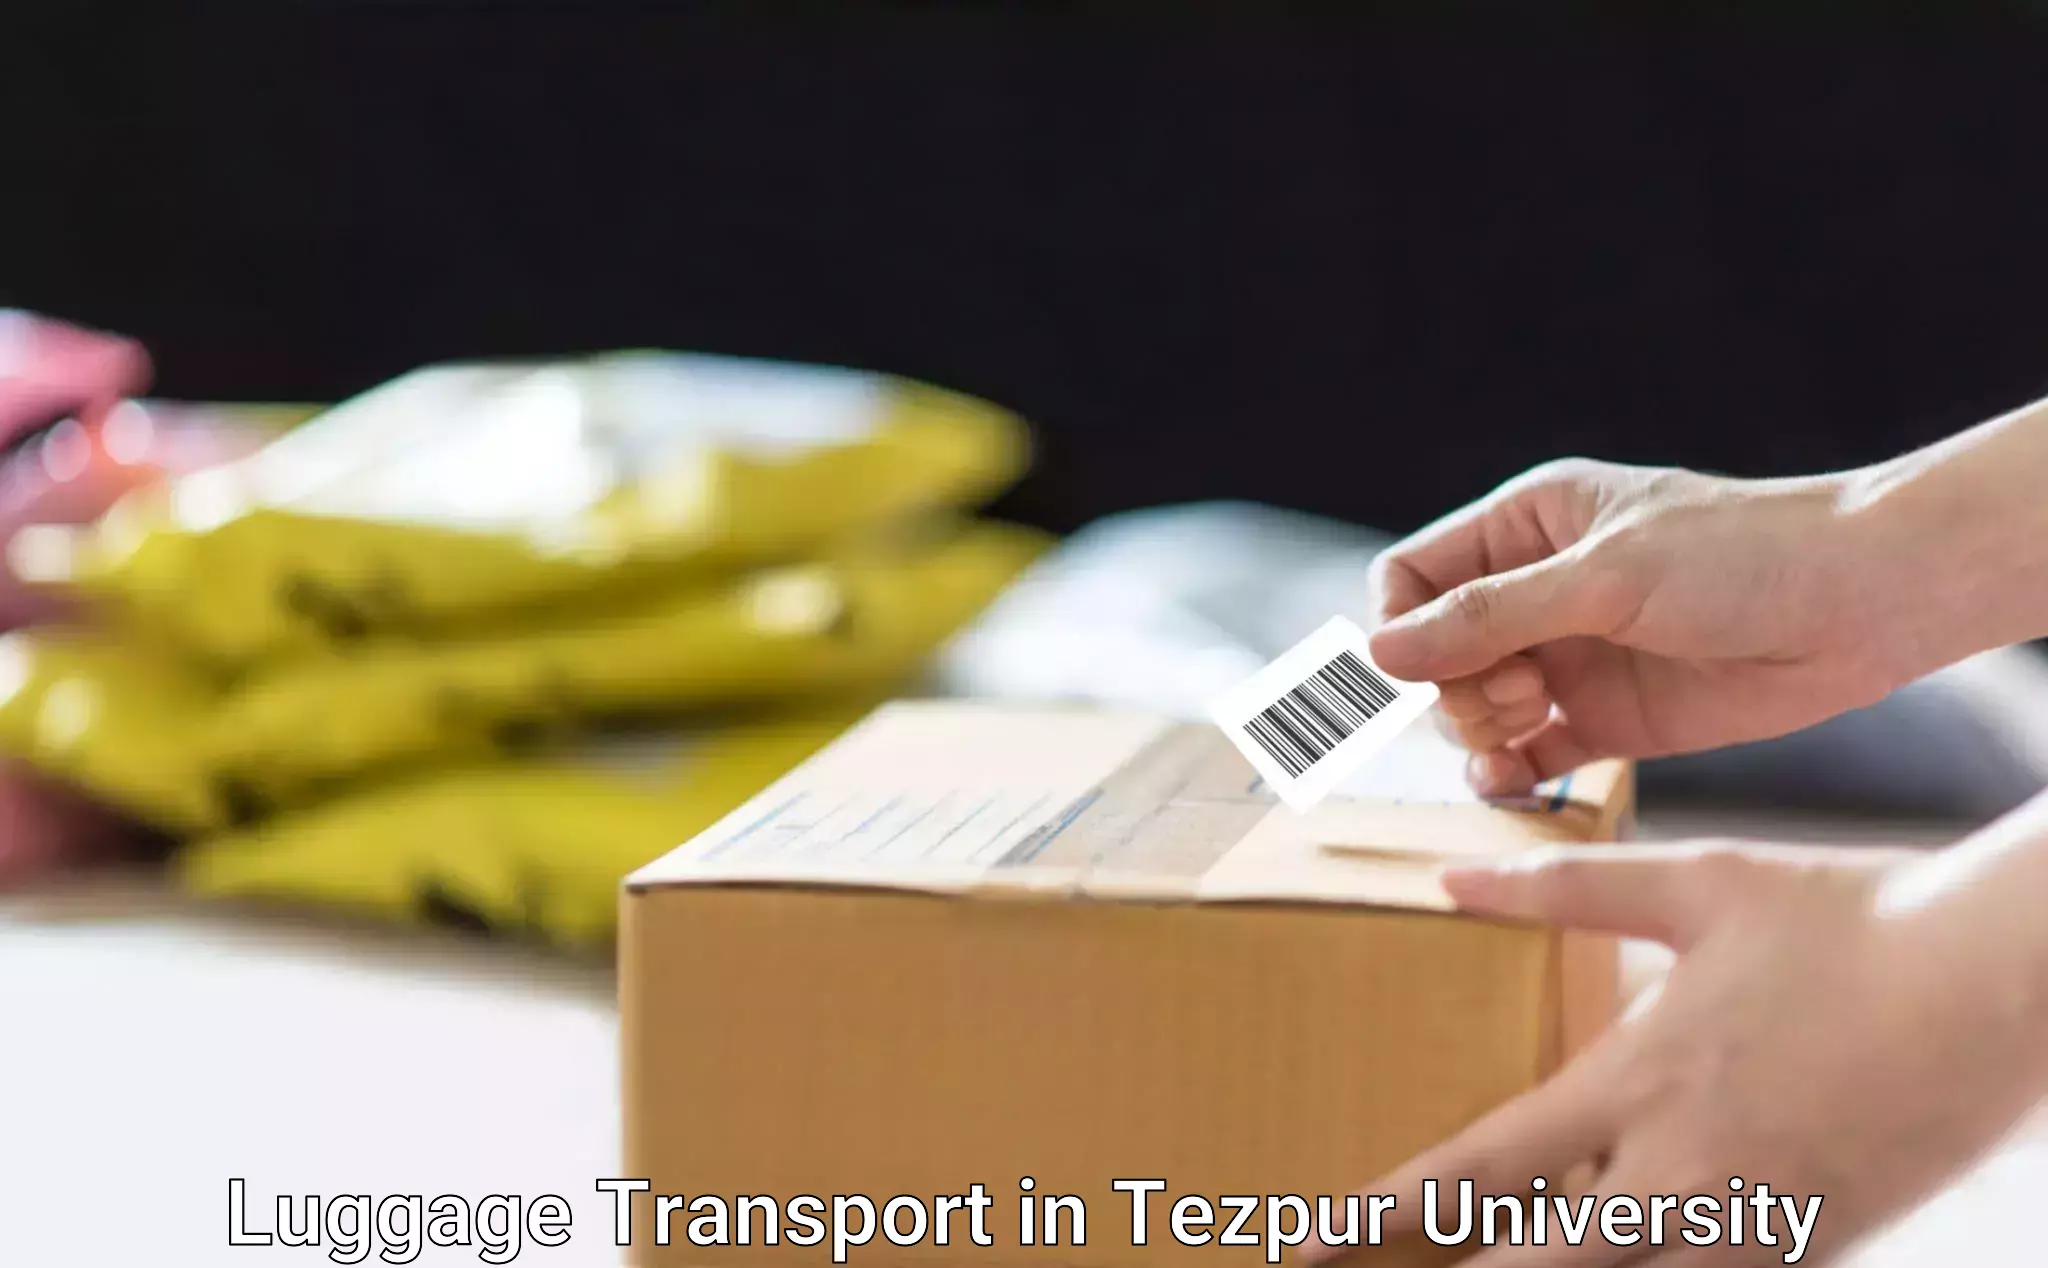 Luggage shipping efficiency in Tezpur University